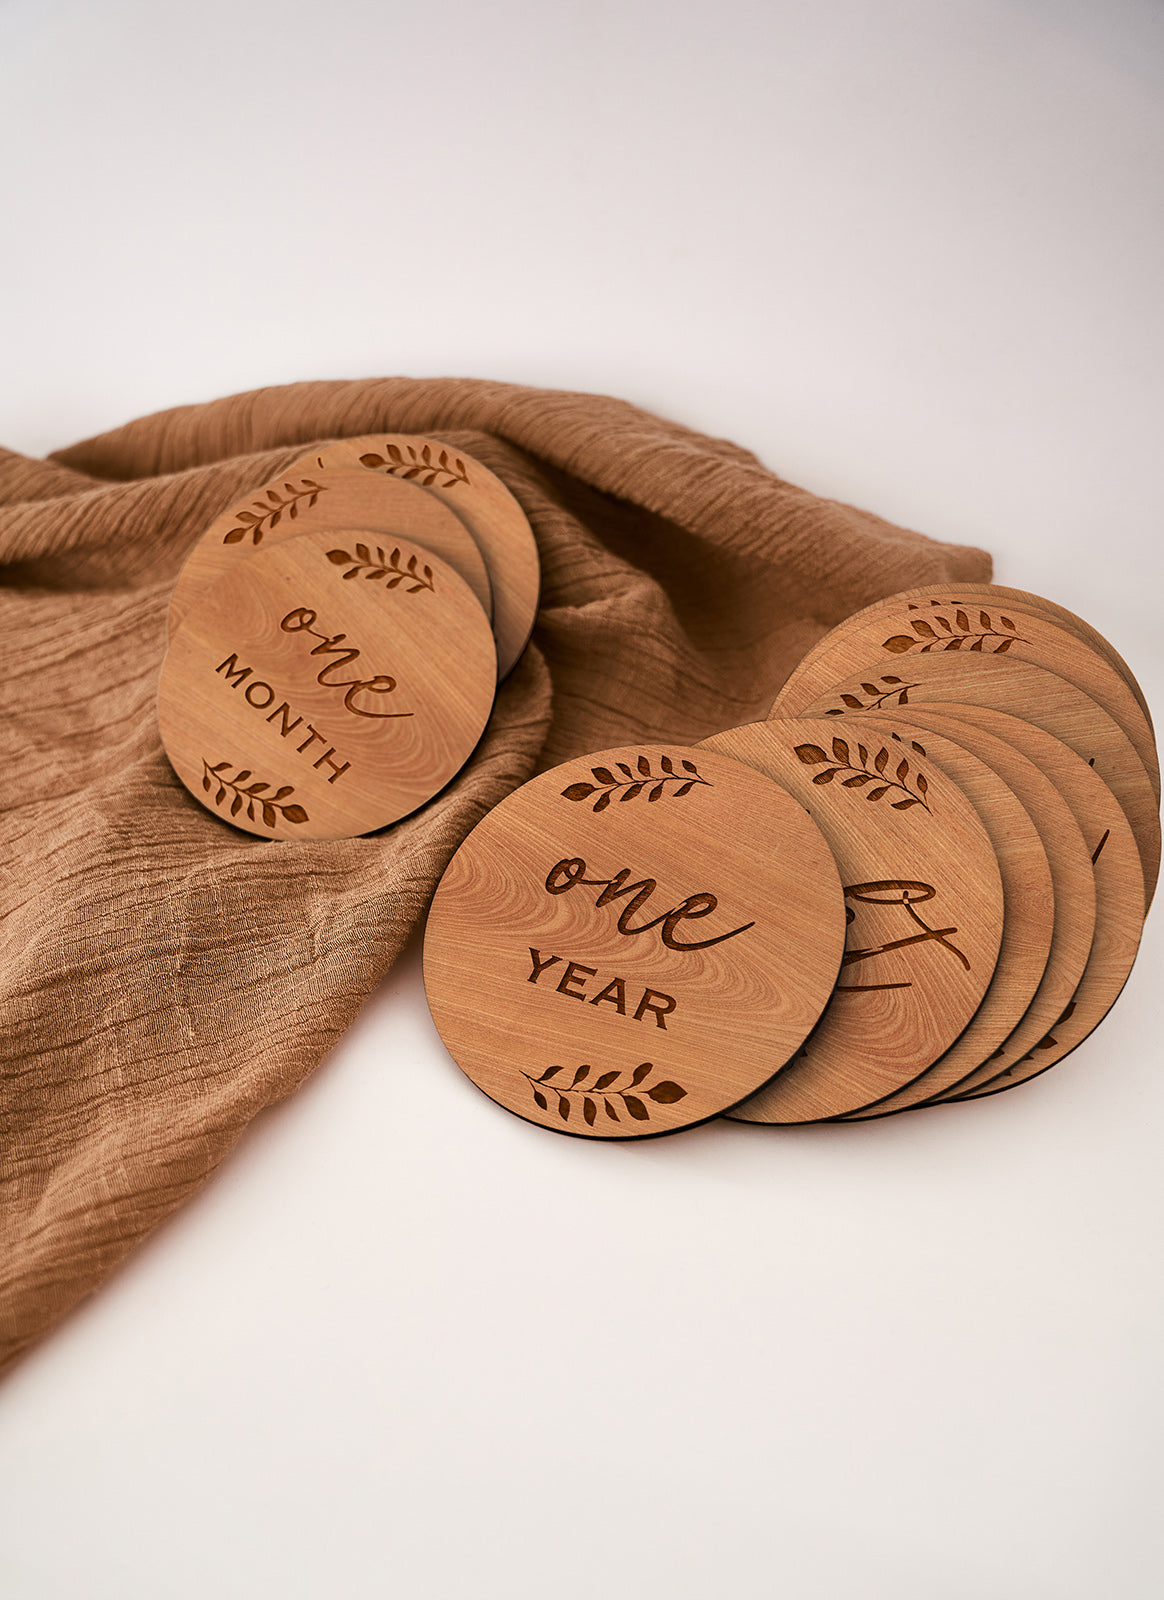 Another image of a laser cutting and engraving project with a brown cloth using Melbourne plywood supplier Plyco's 3mm Queensland Coachwood Legnoply Pack on a white background